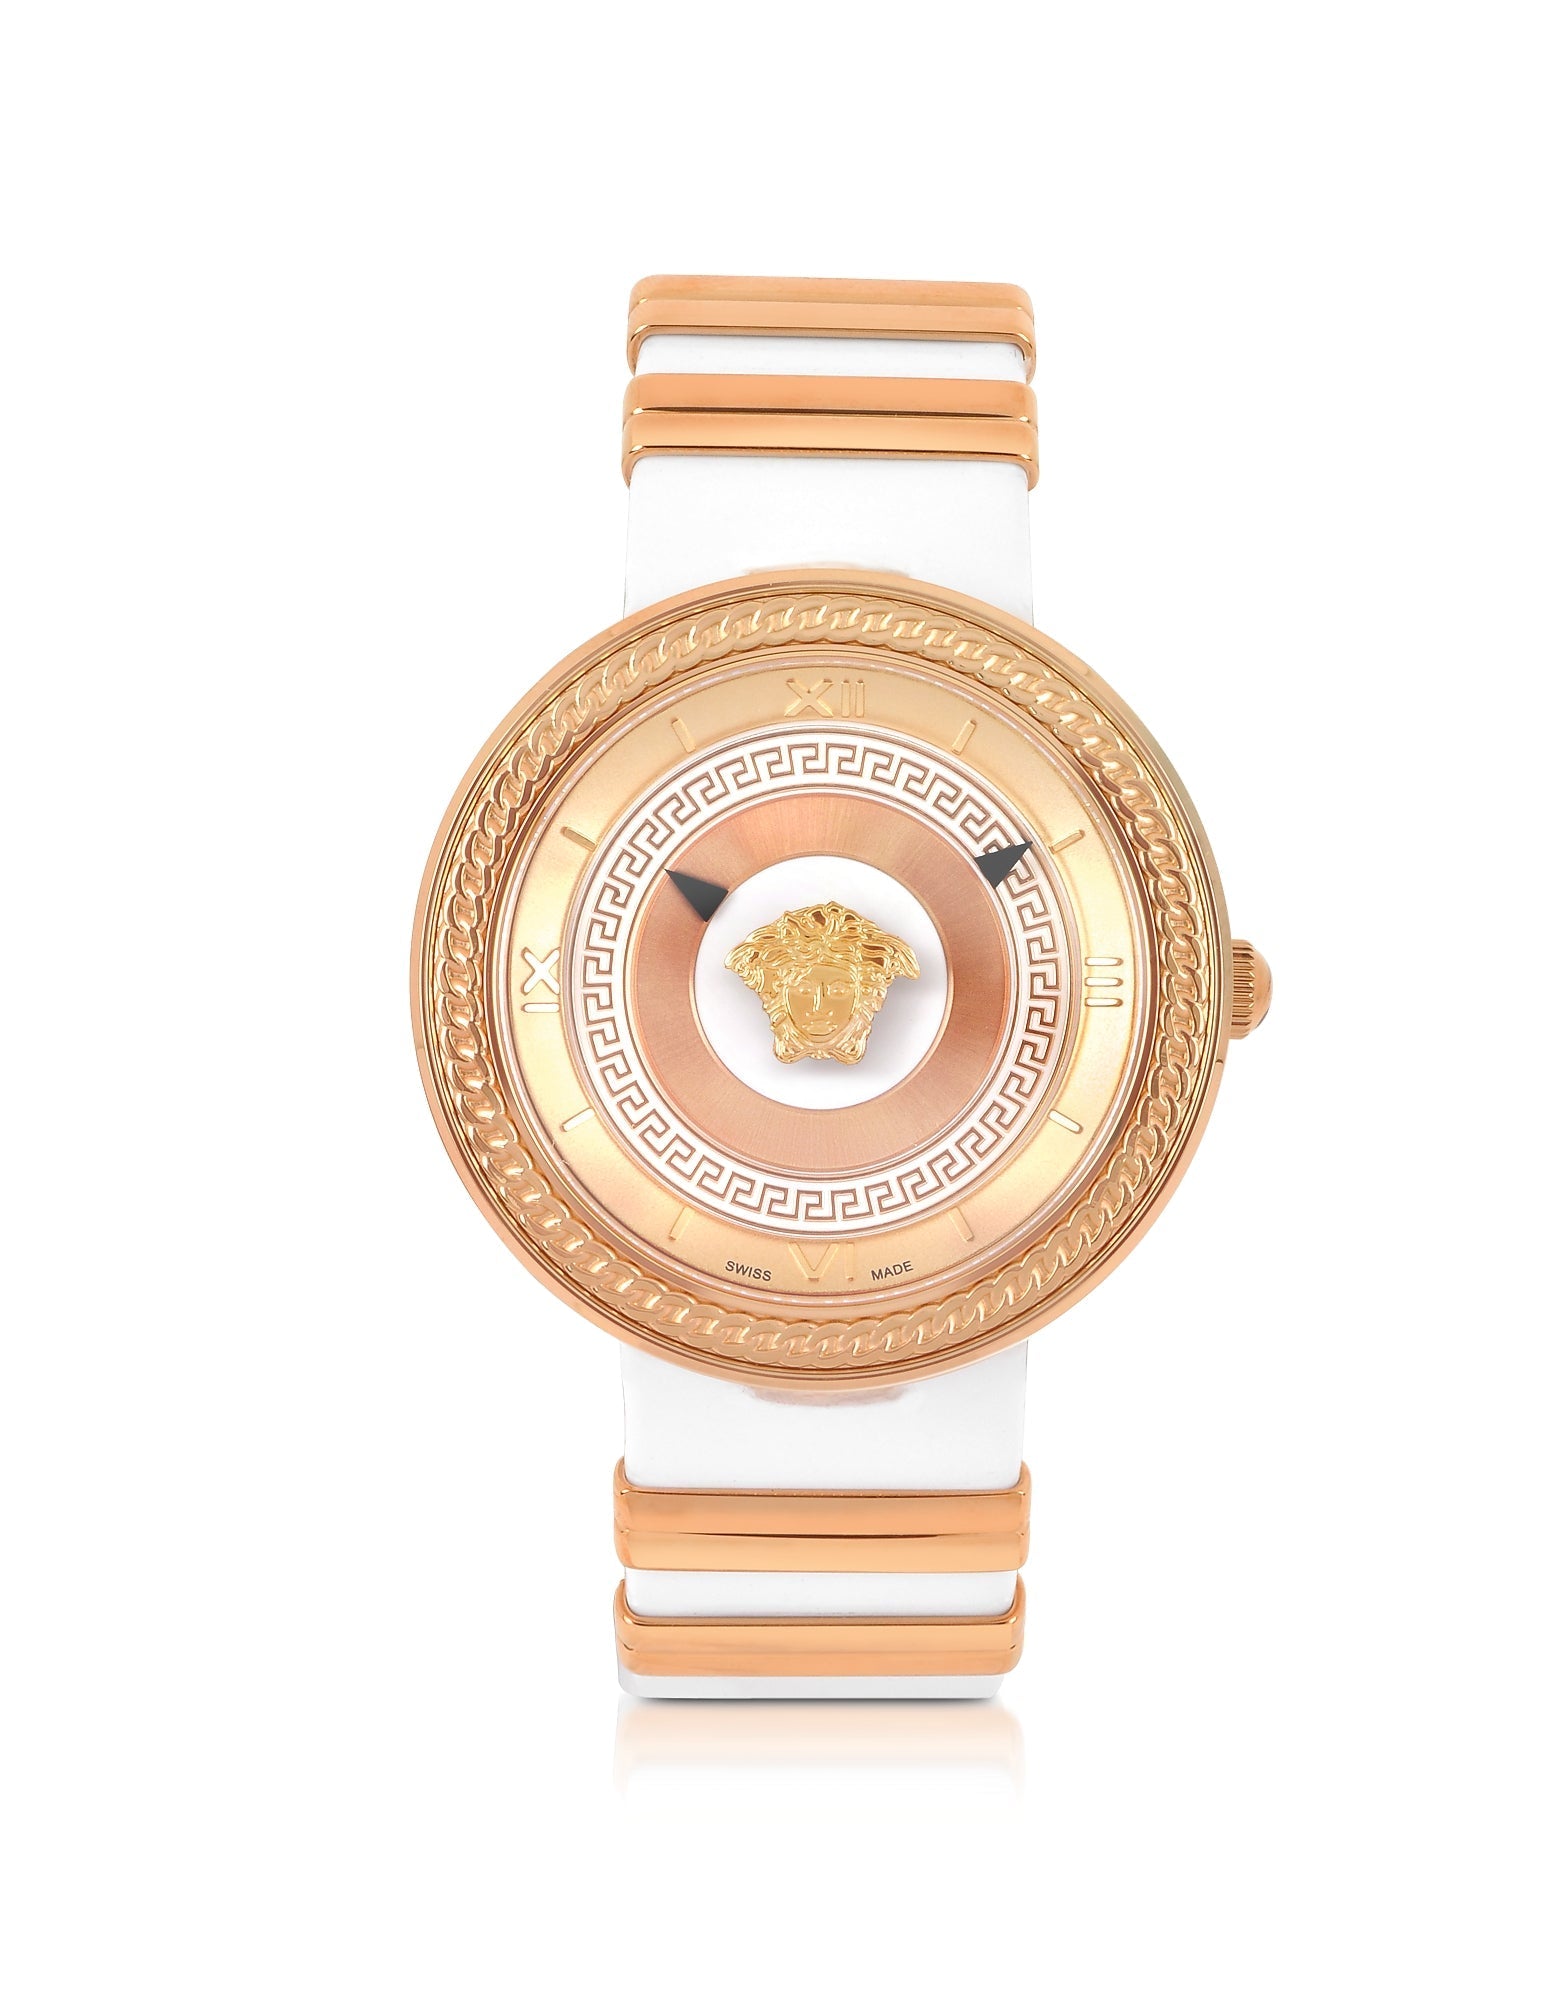 Versace V Metal Icon Gold Dial White & Gold Strap Watch for Women - VLC040014